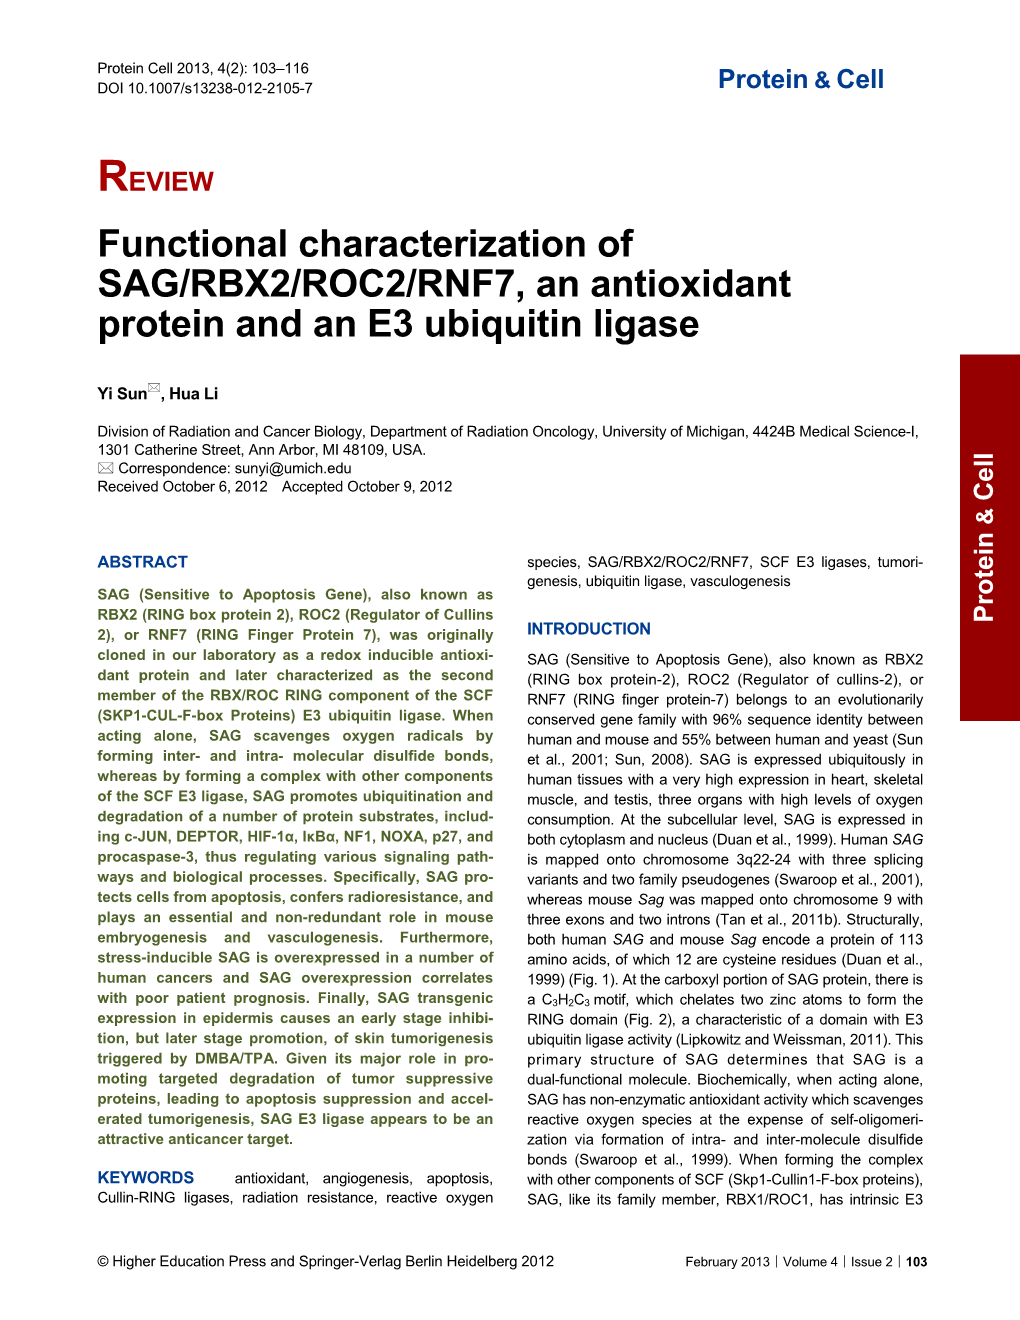 Functional Characterization of SAG/RBX2/ROC2/RNF7, an Antioxidant Protein and an E3 Ubiquitin Ligase